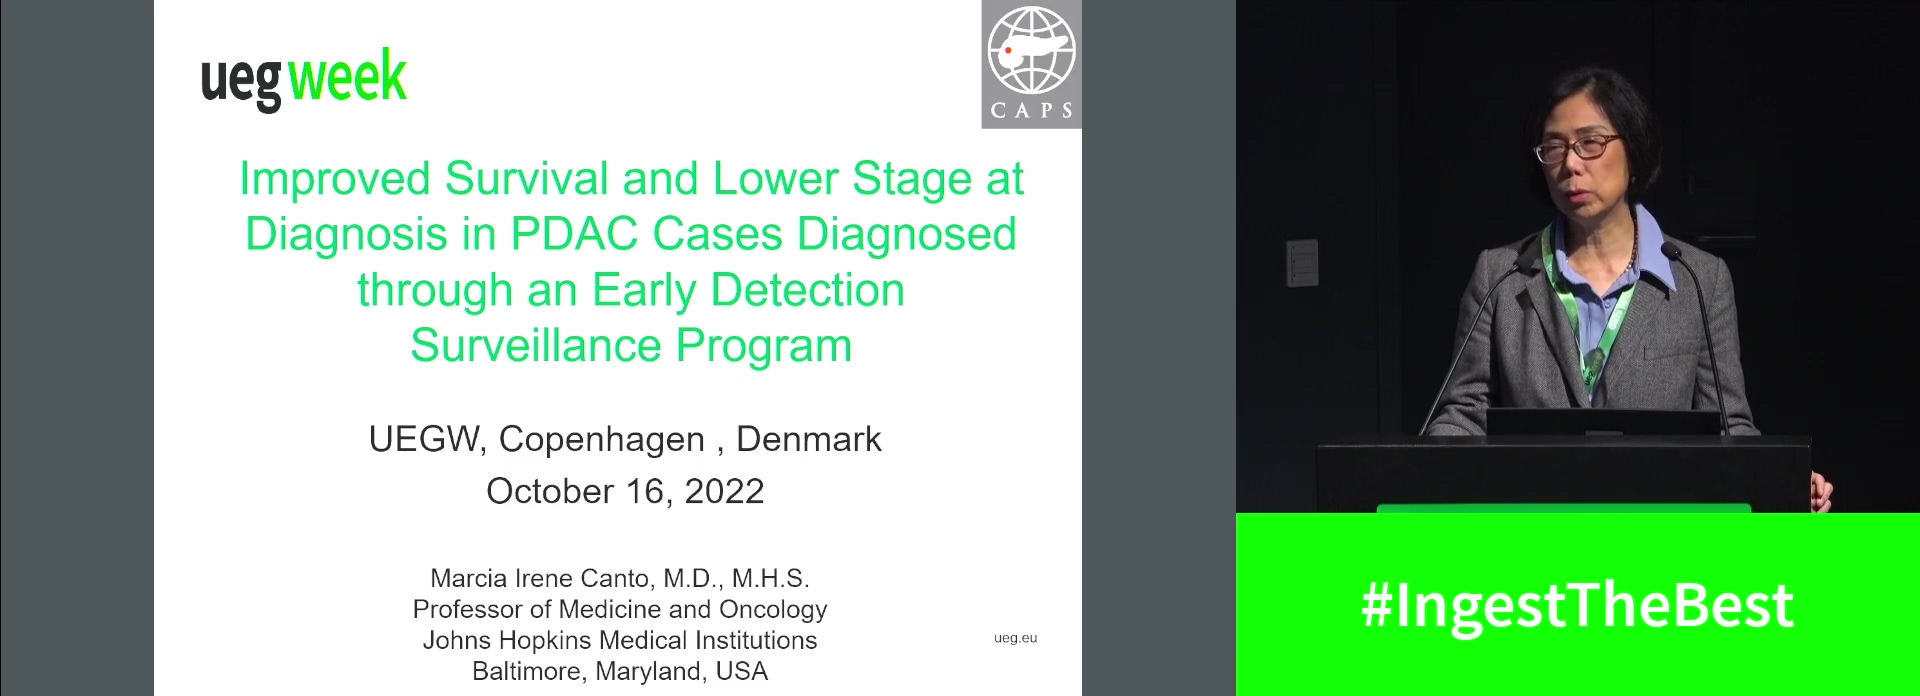 IMPROVED SURVIVAL AND LOWER STAGE AT DIAGNOSIS IN PANCREATIC DUCTAL ADENOCARCINOMA CASES DIAGNOSED THROUGH AN EARLY DETECTION SURVEILLANCE PROGRAM